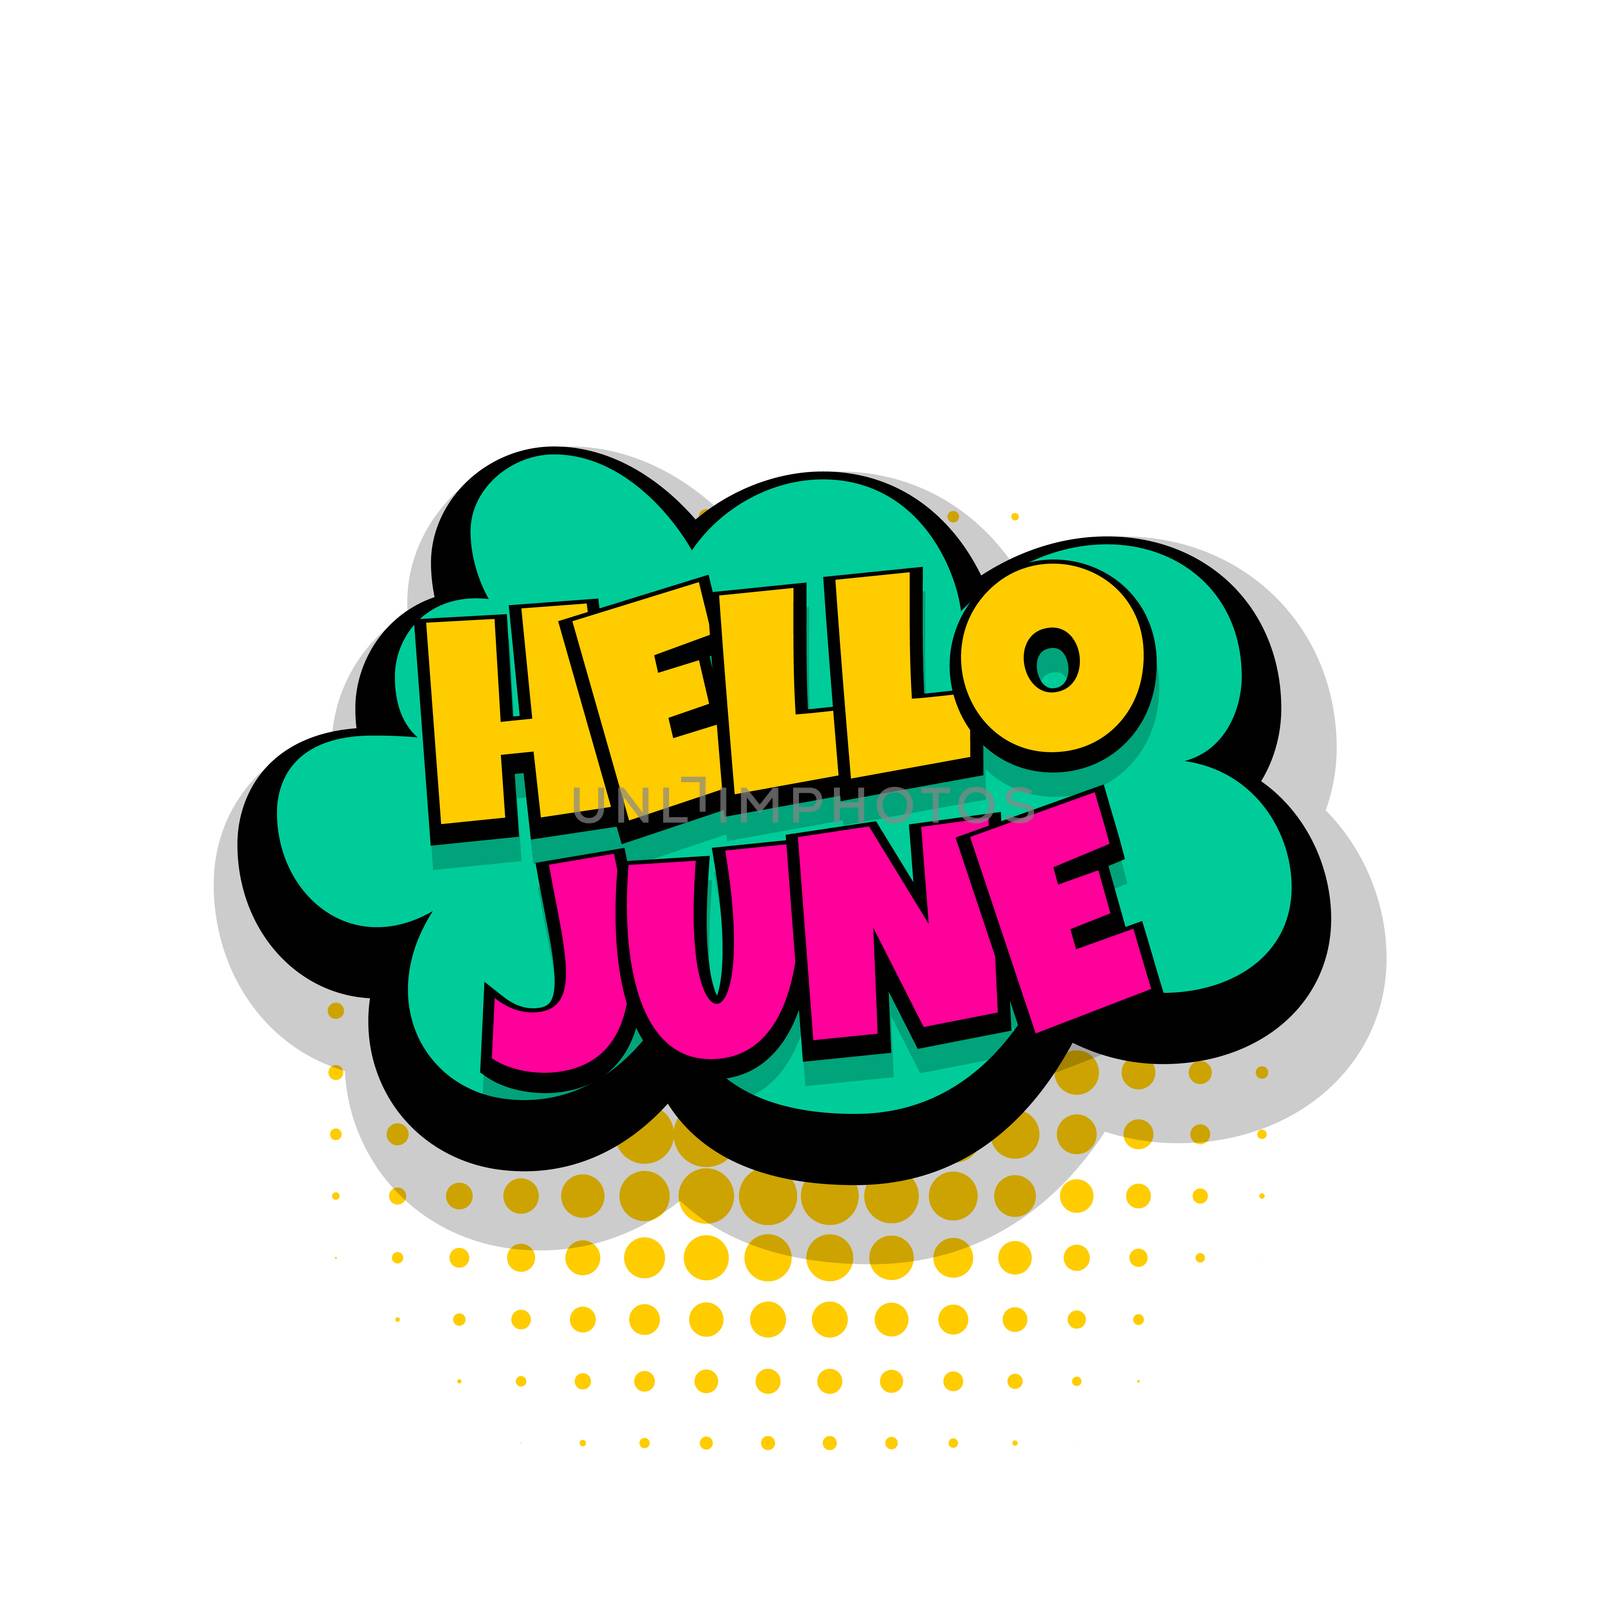 Lettering june month greeting. Comics book balloon. Bubble icon speech phrase. Cartoon font label tag expression. Comic text sound effects. Sounds vector illustration.